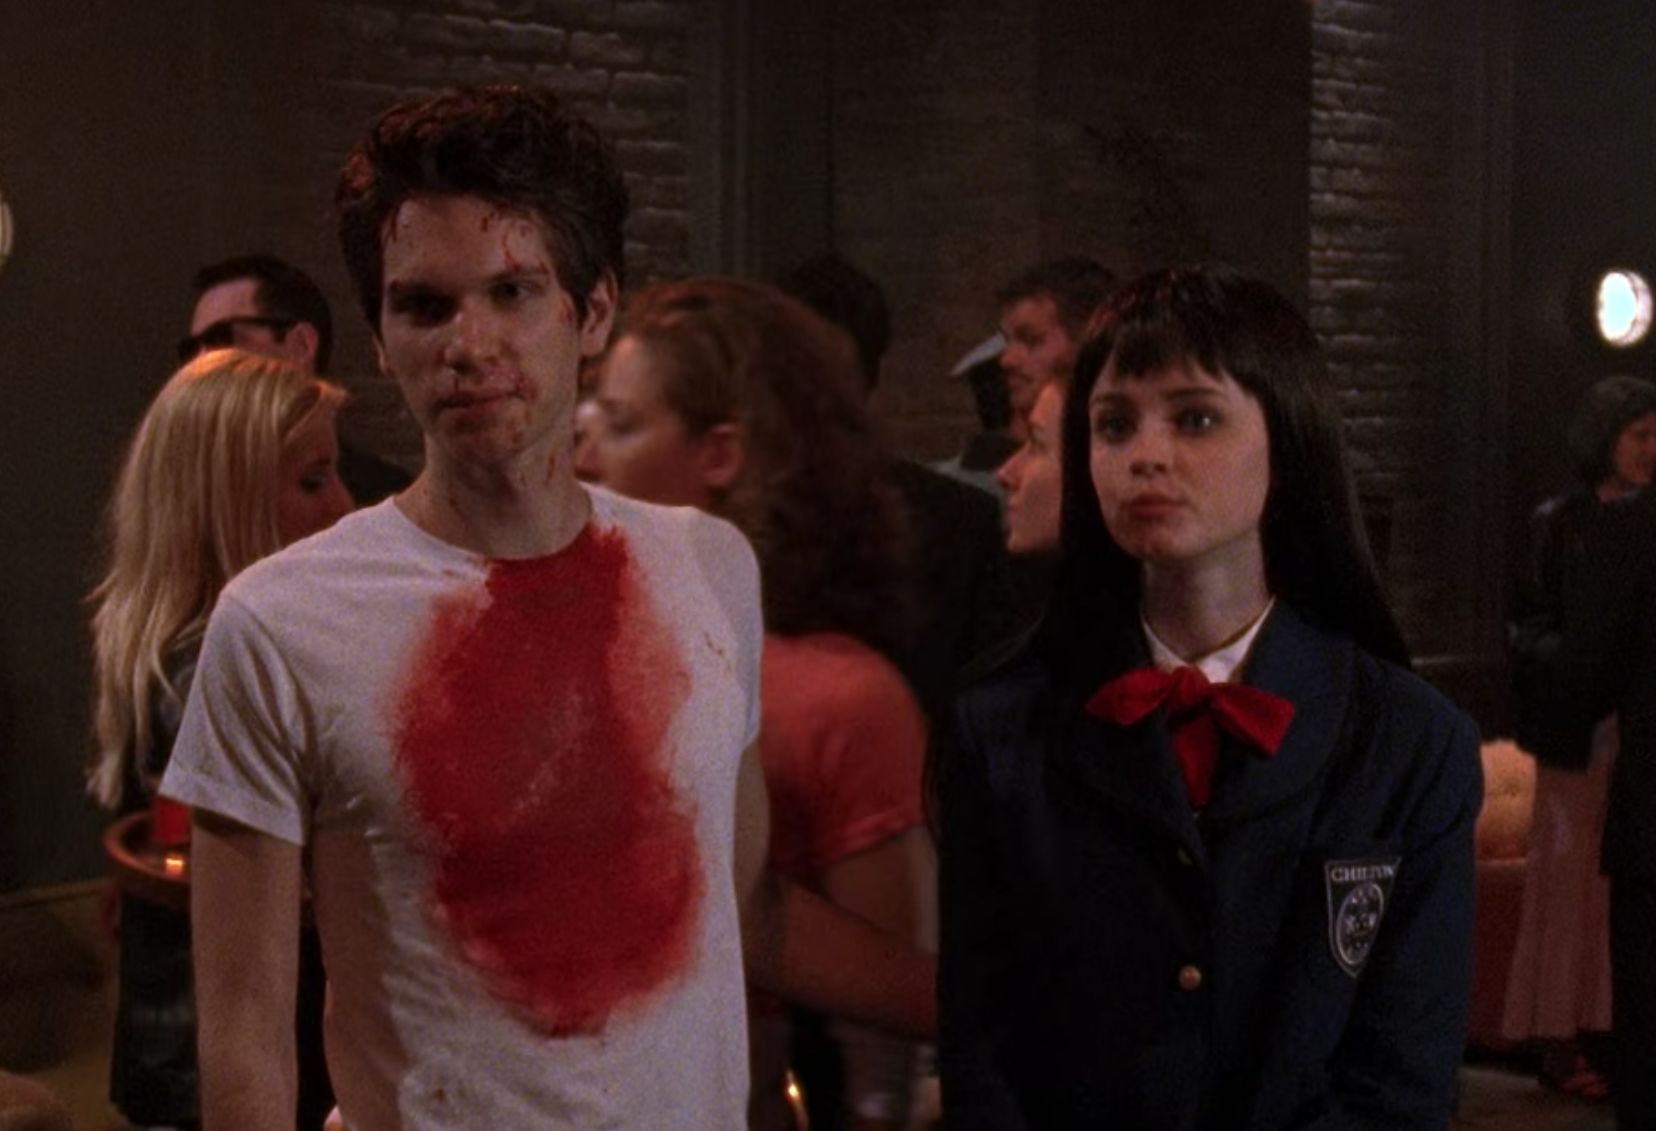 Robert wears a plain t-shirt with a blood stain on it and Rory wears a private school uniform and a long wig